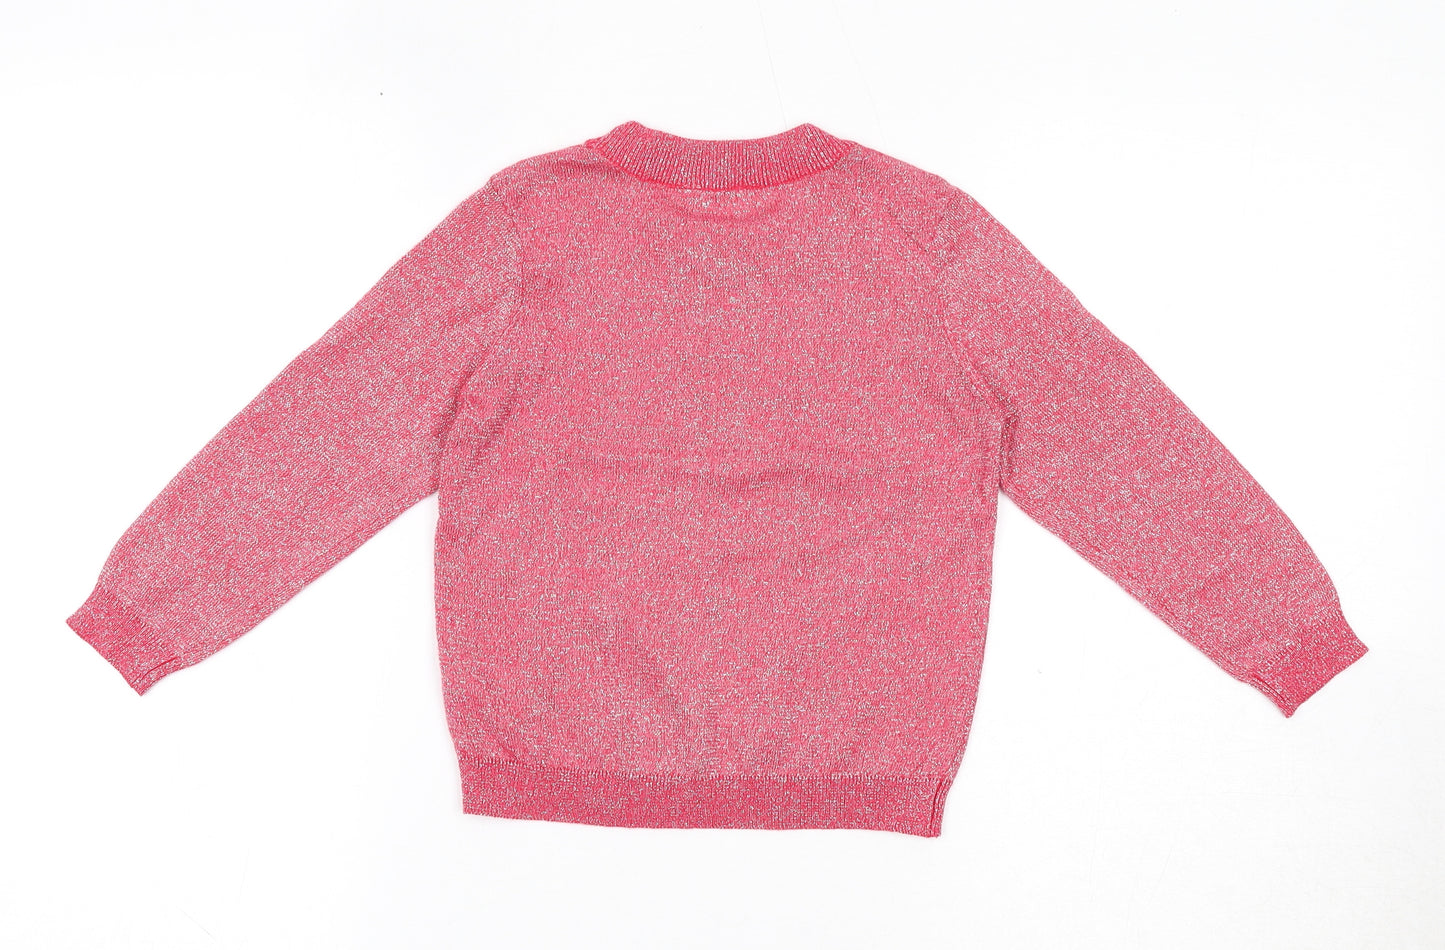 M&Co Girls Pink Crew Neck Cotton Pullover Jumper Size 4-5 Years Pullover